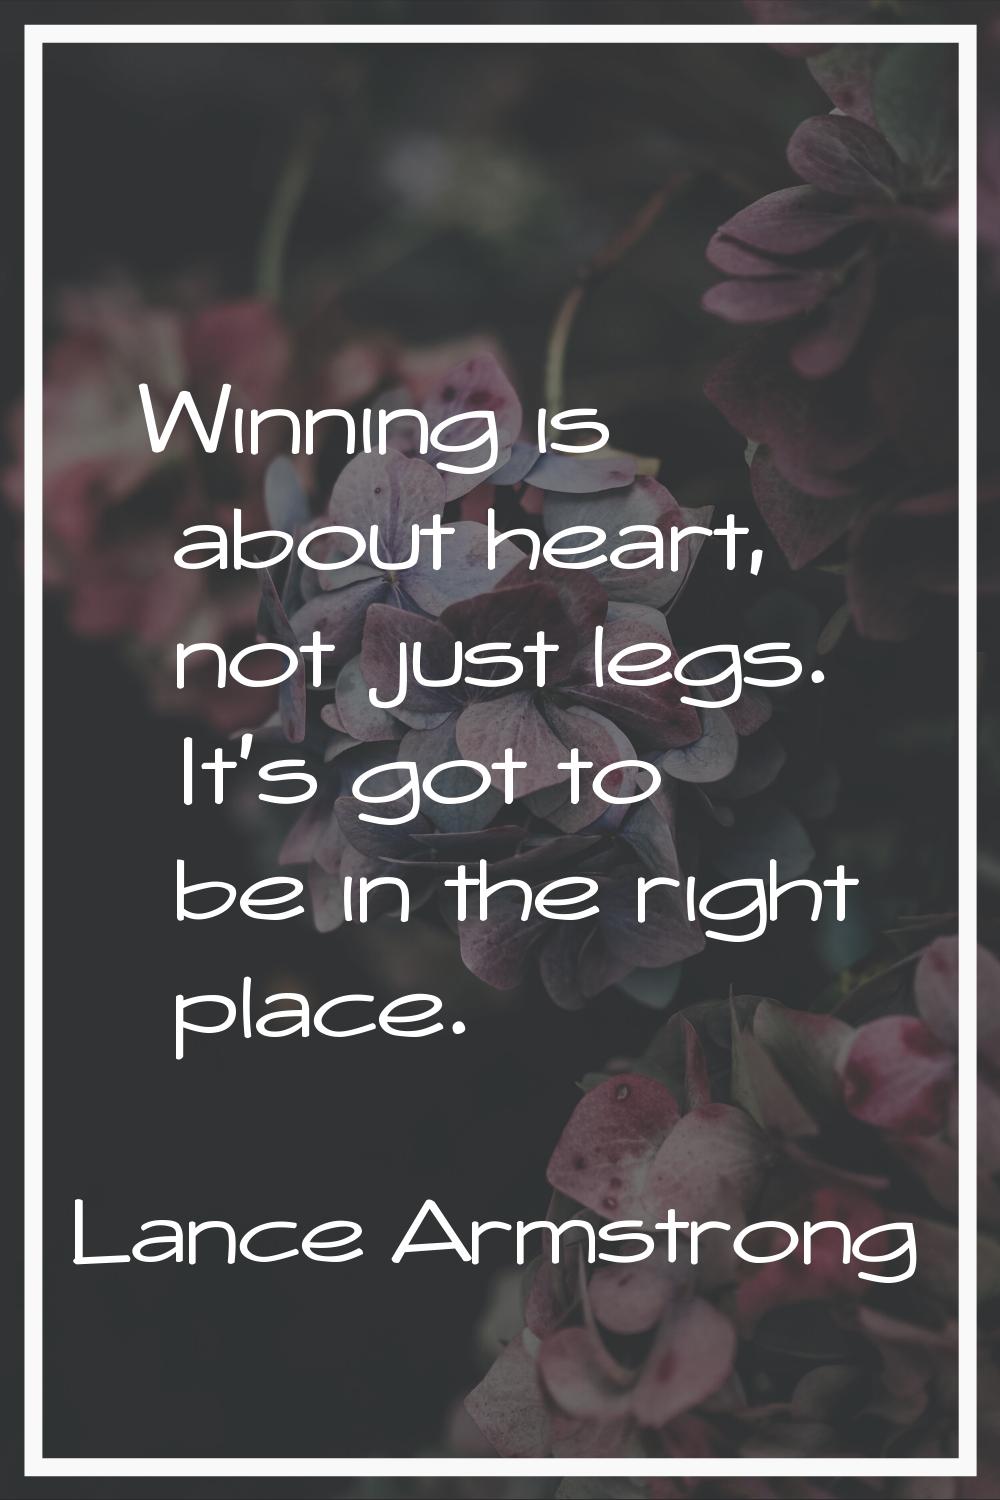 Winning is about heart, not just legs. It's got to be in the right place.